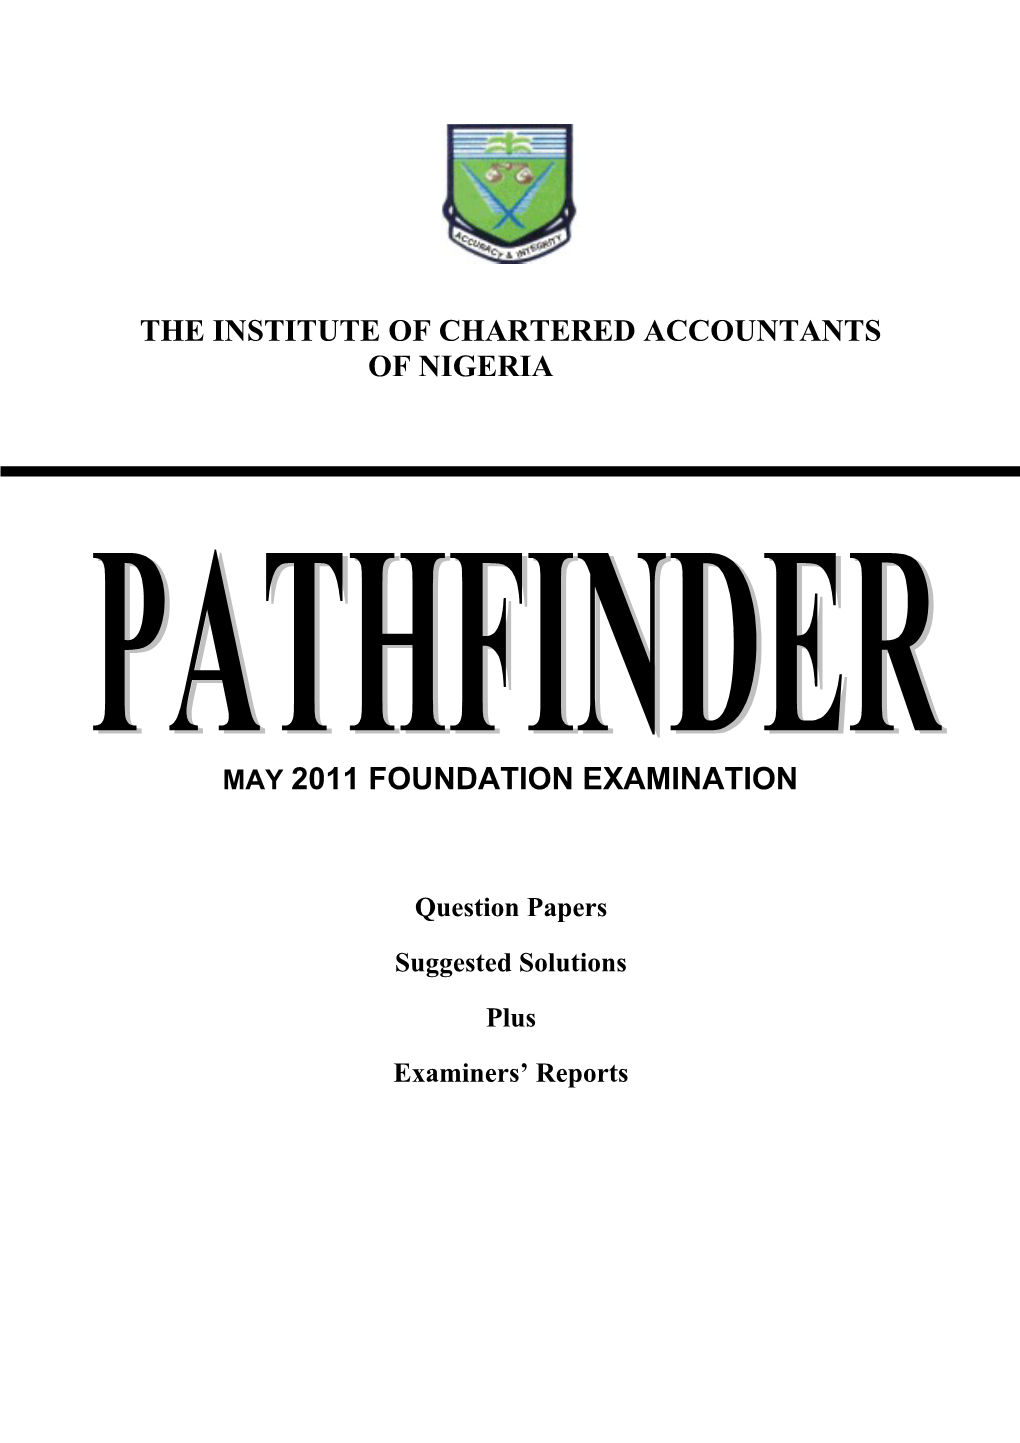 The Institute of Chartered Accountants